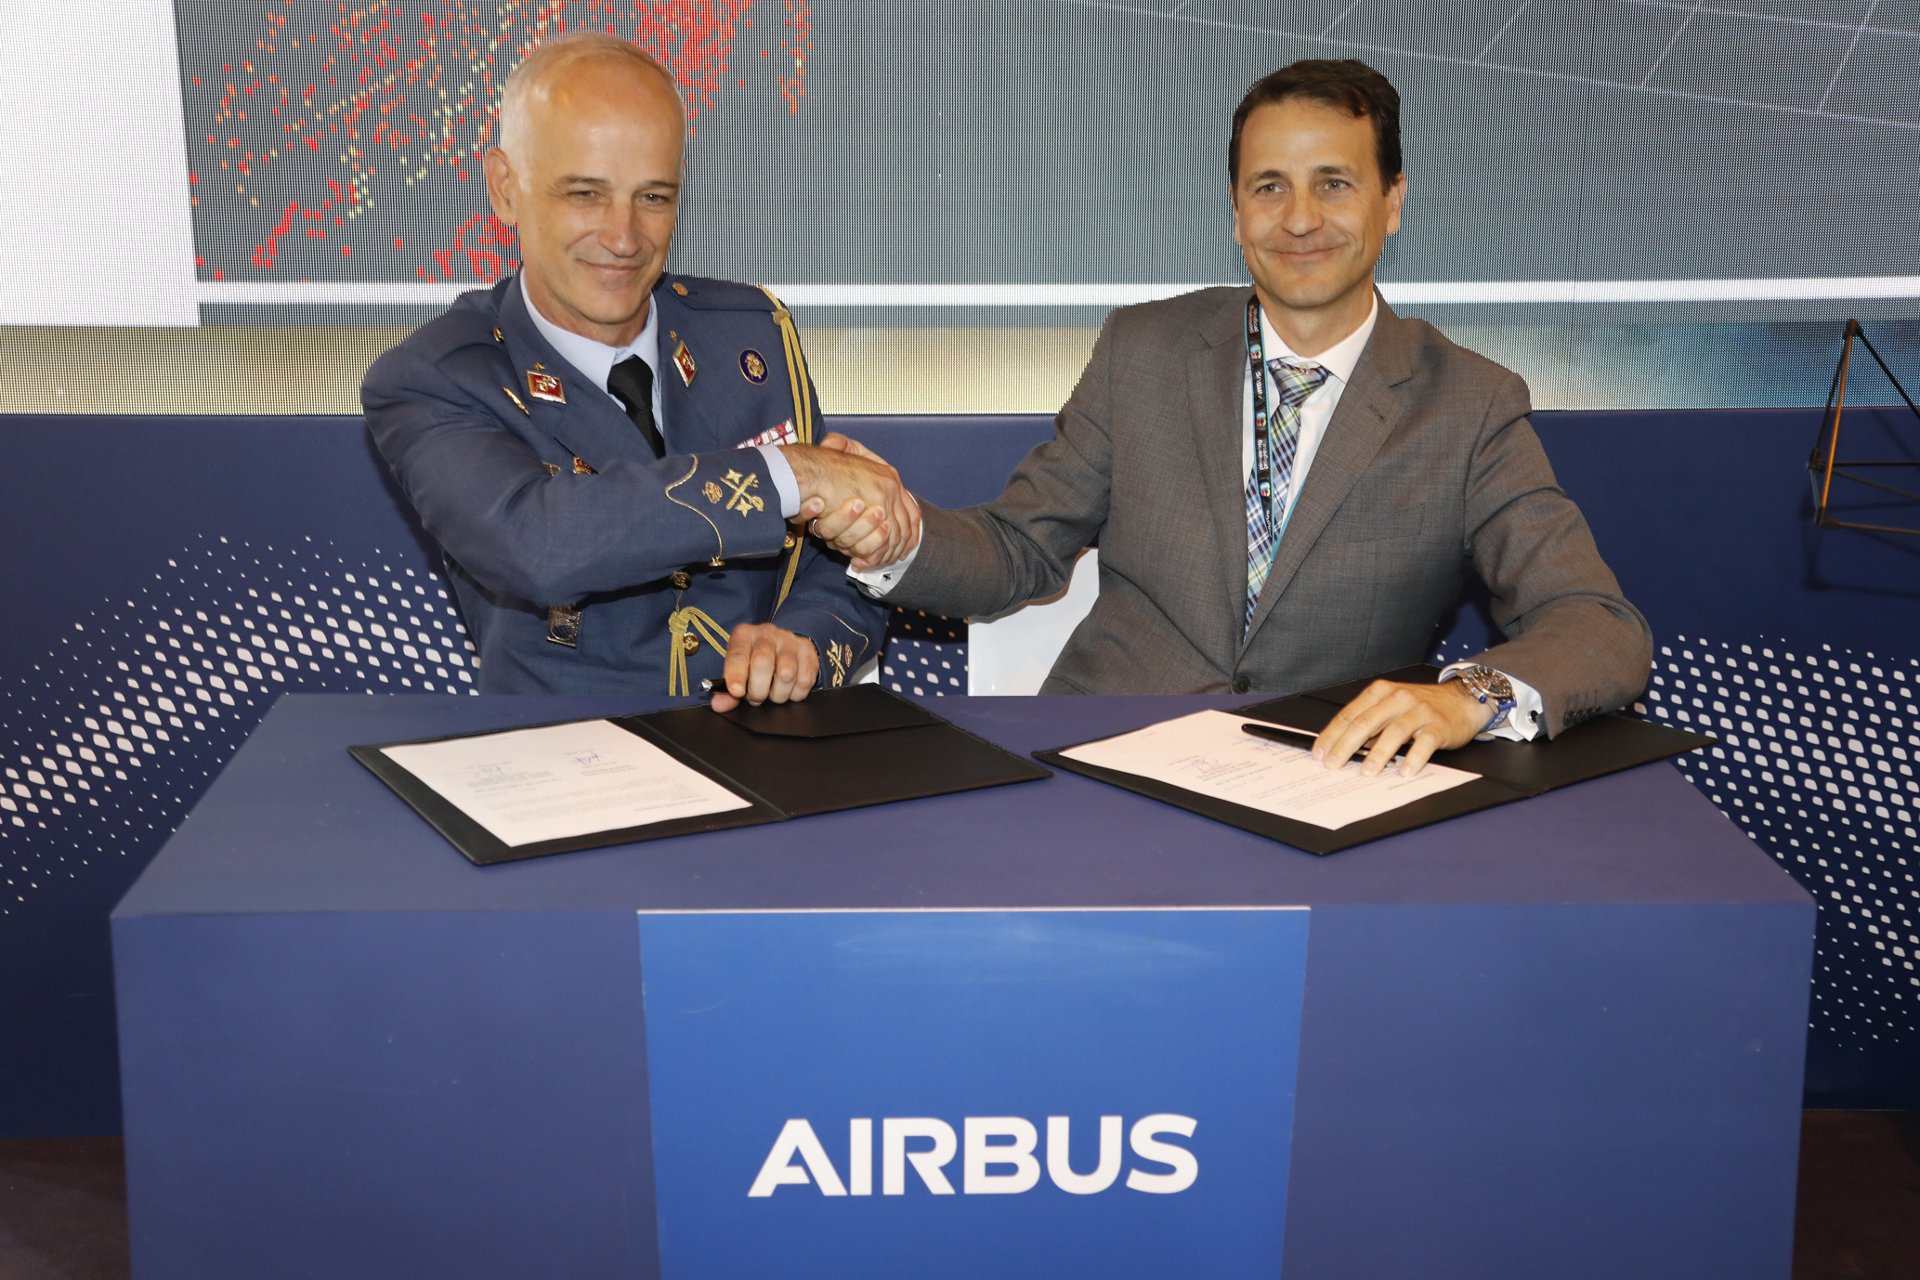 Airbus And Spanish Air Force To Develop Drone And Augmented